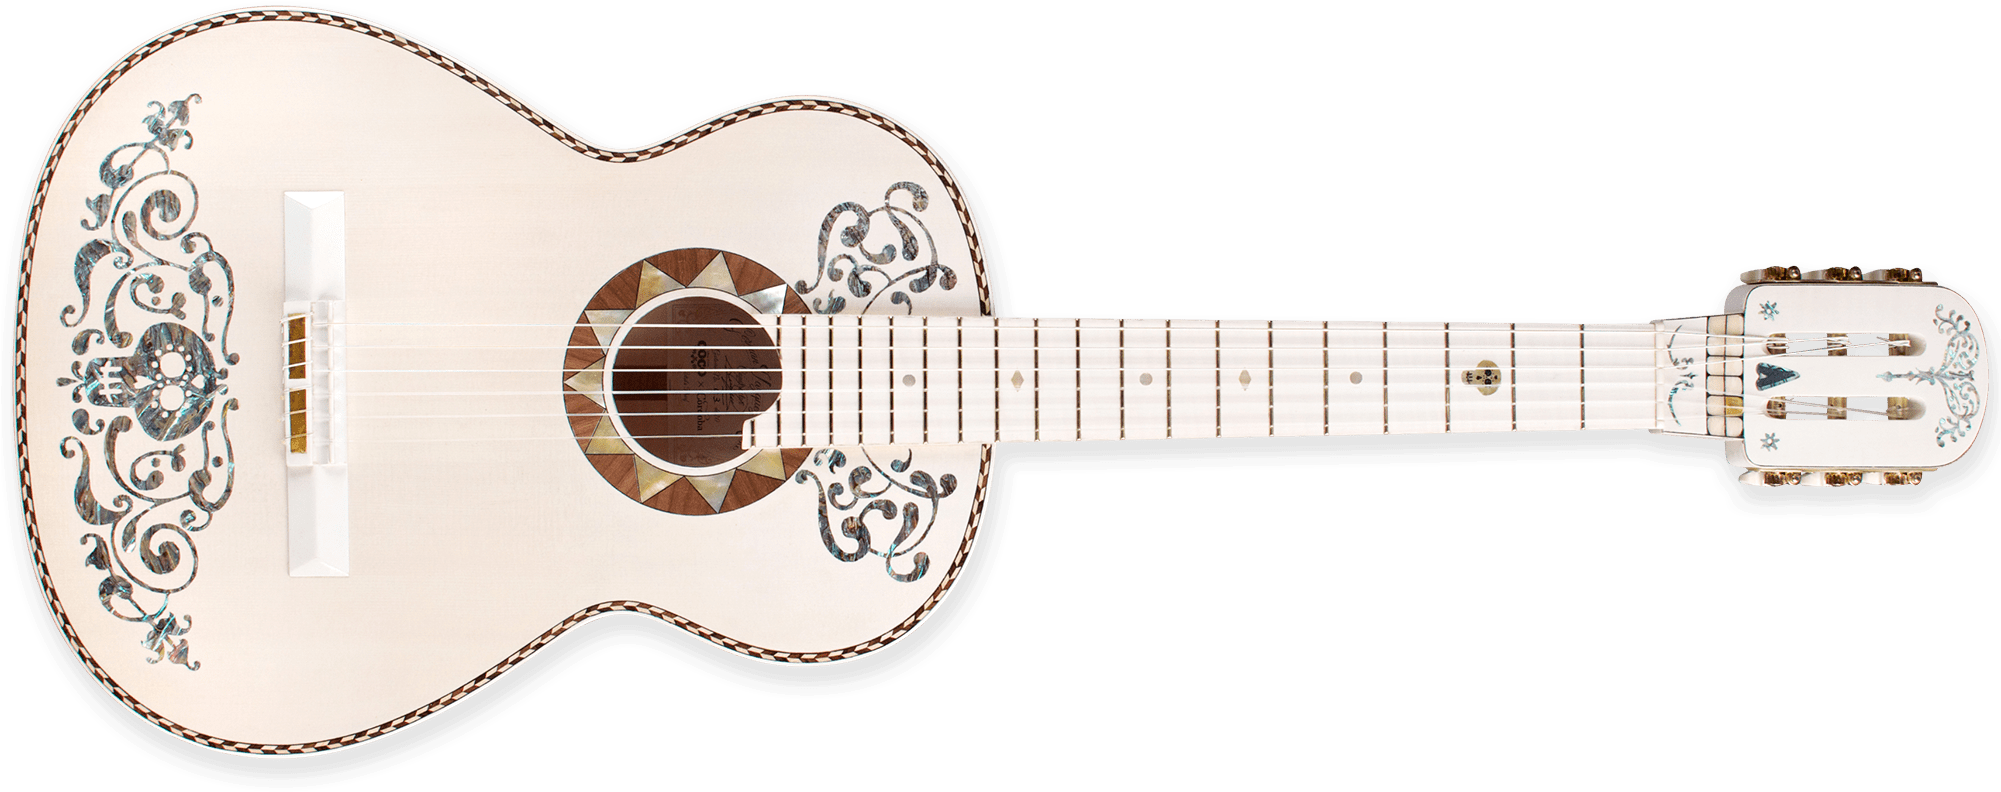 2000 X 875 328 - Miguel Coco Guitar Clipart - Large Size Png Image - PikPng...